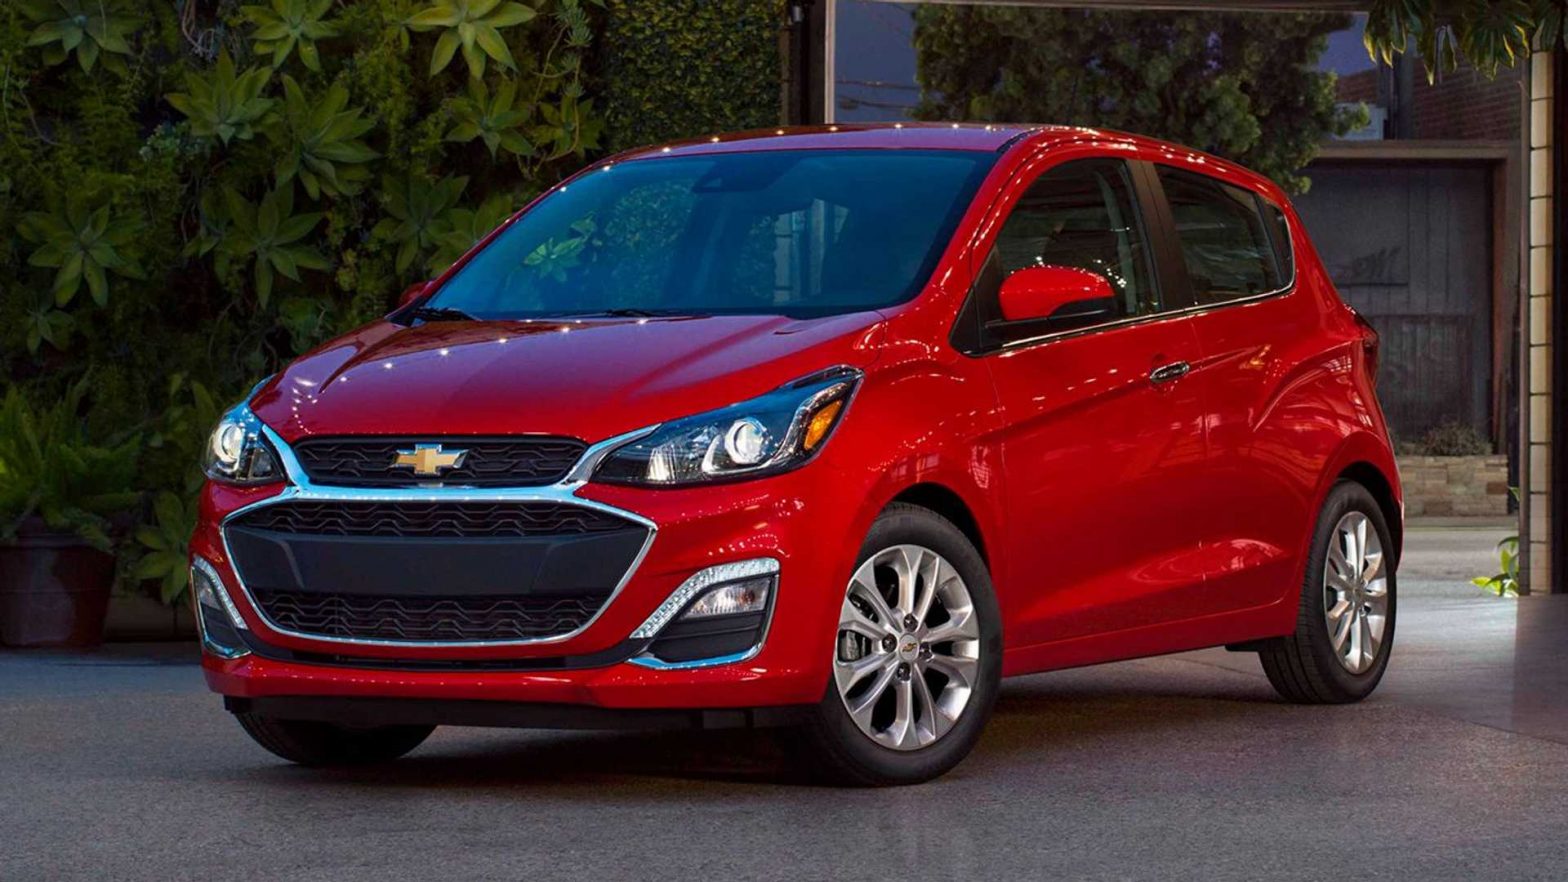 2021 Chevrolet Spark – Best Car On A Budget